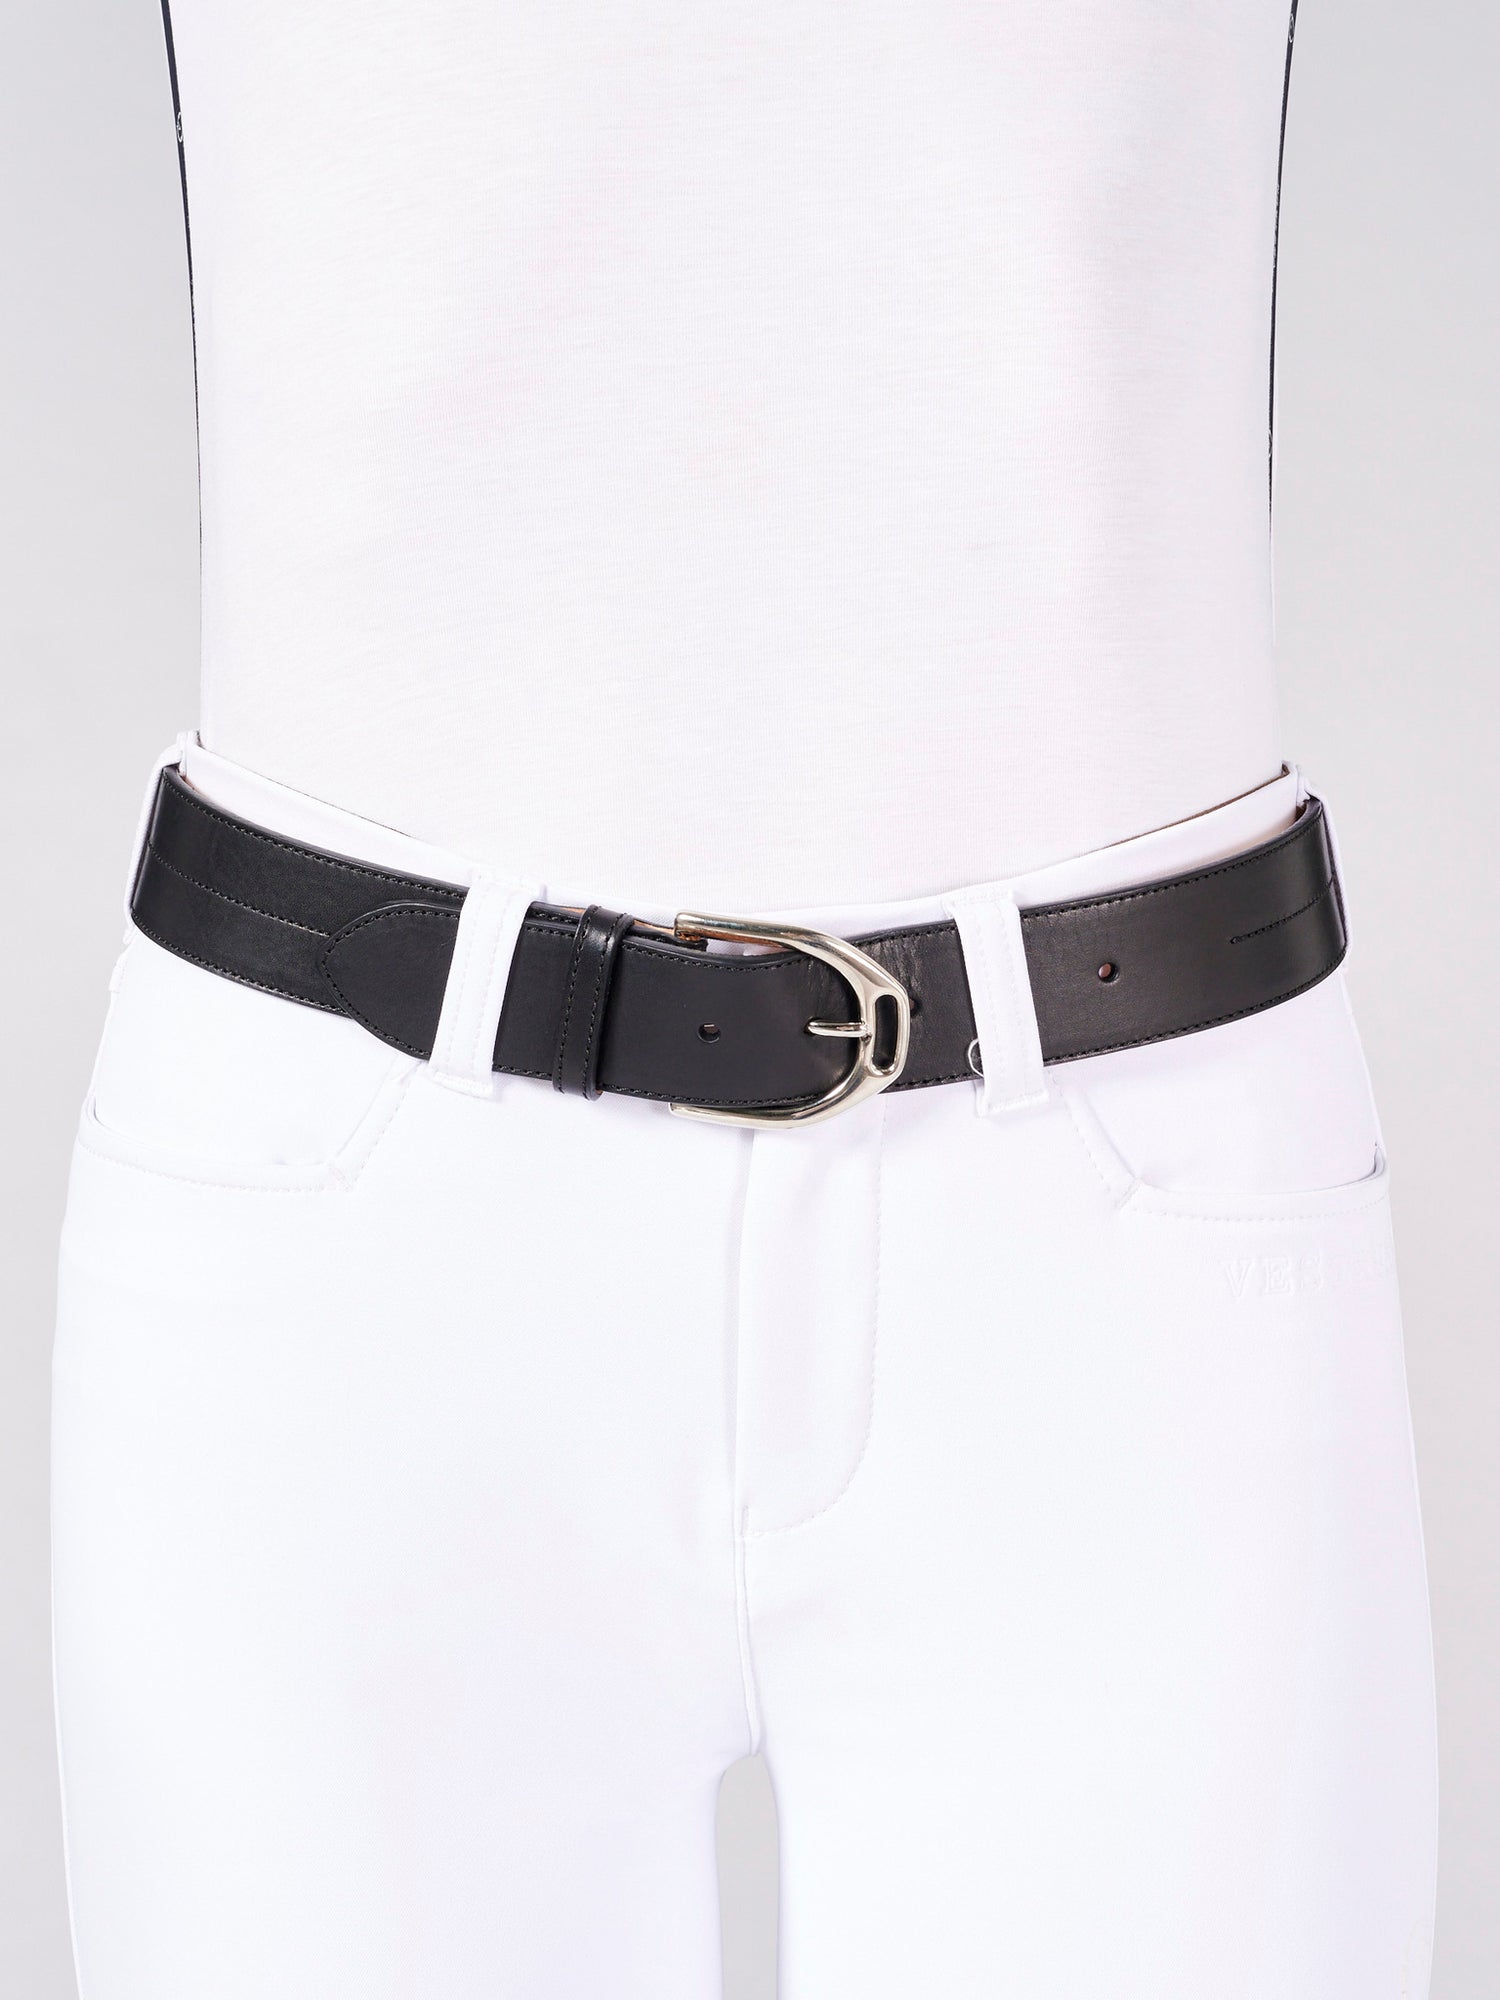 The Vestrum Buenos Aires Black Leather Belt is stunning. The belt is made from luxury leather with stitched detail running through. The detailed buckle adds a point of difference. 